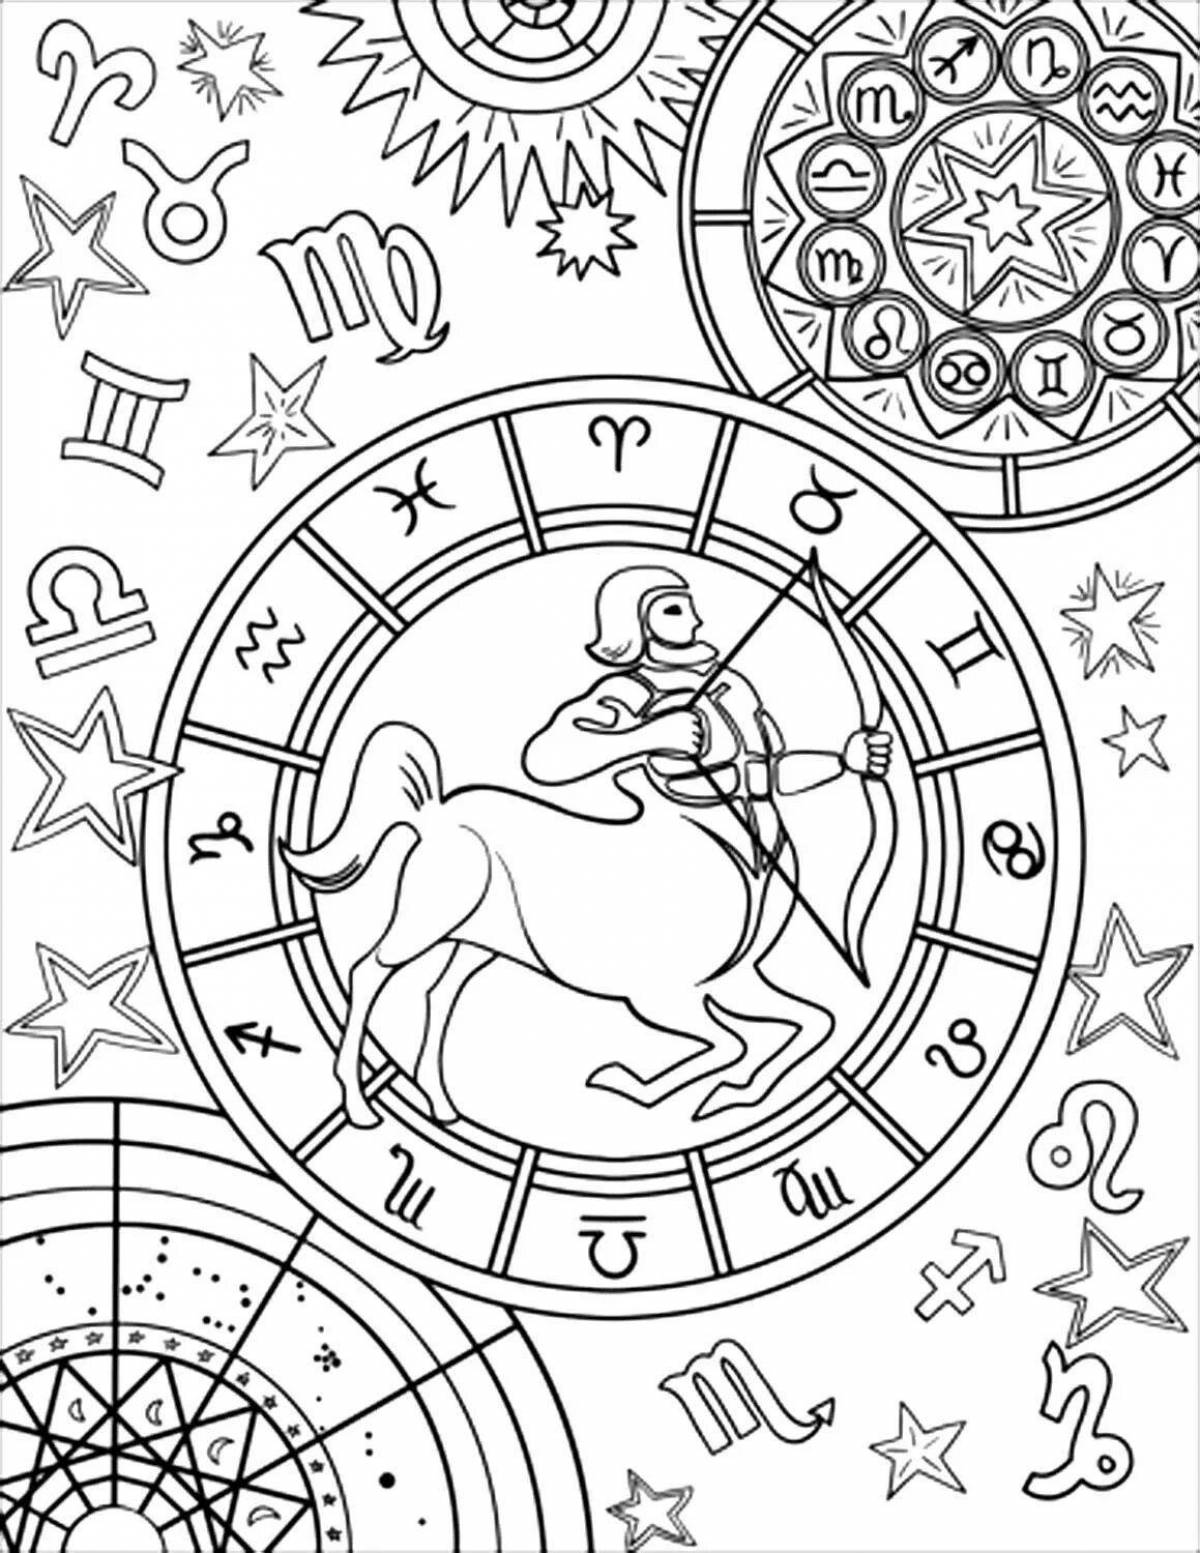 Fancy coloring of the zodiac